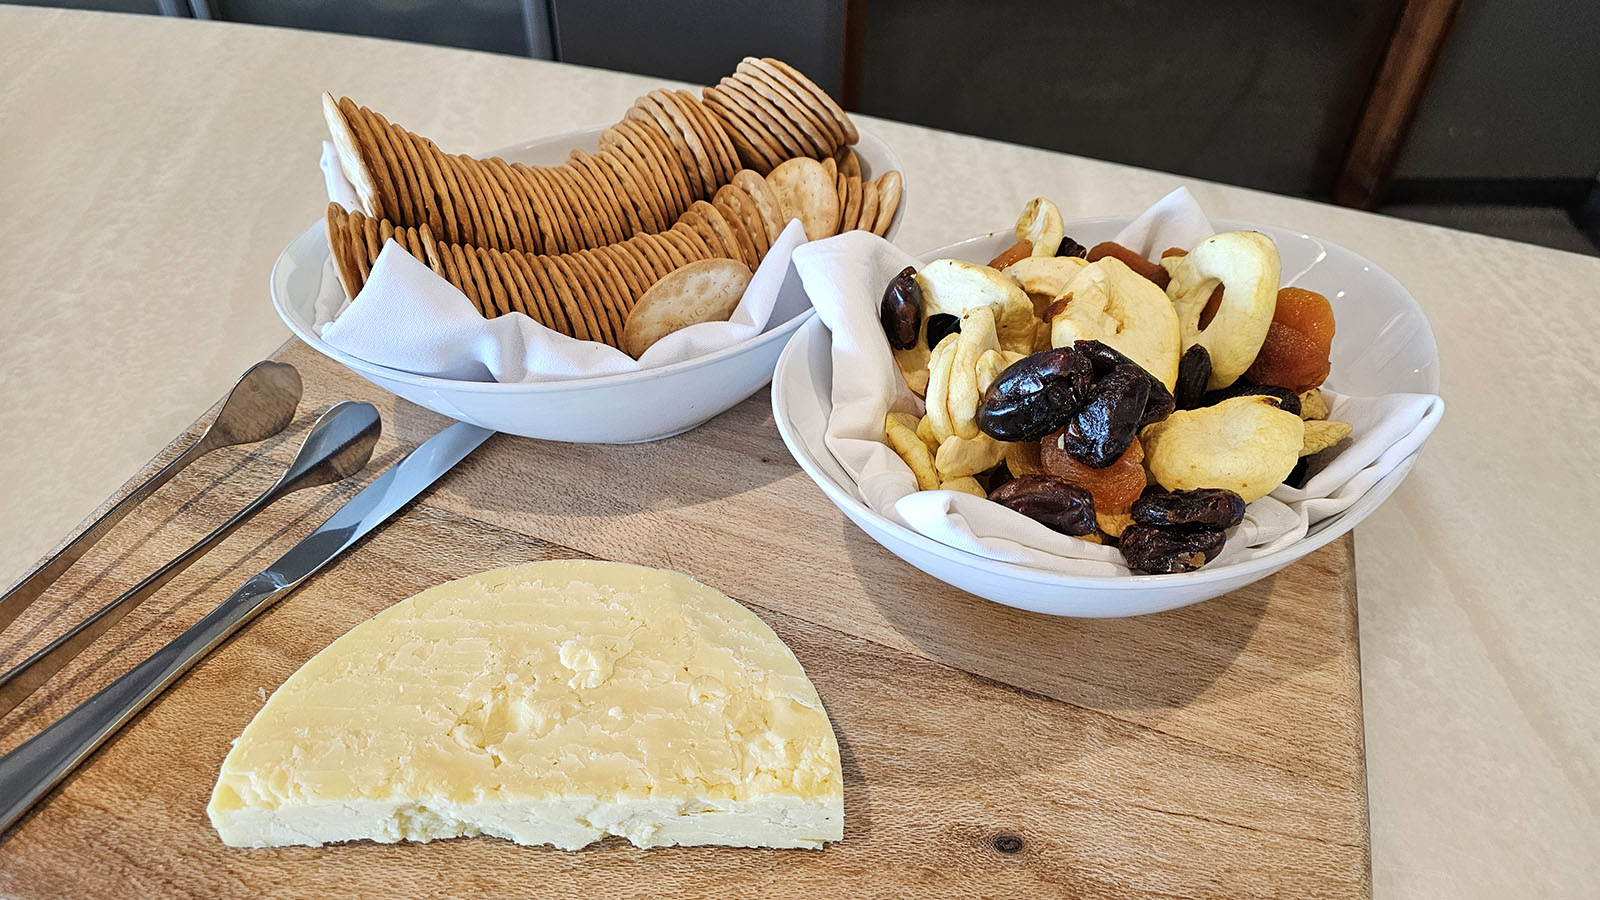 Cheese and accompaniments in the Virgin Australia Lounge, Canberra